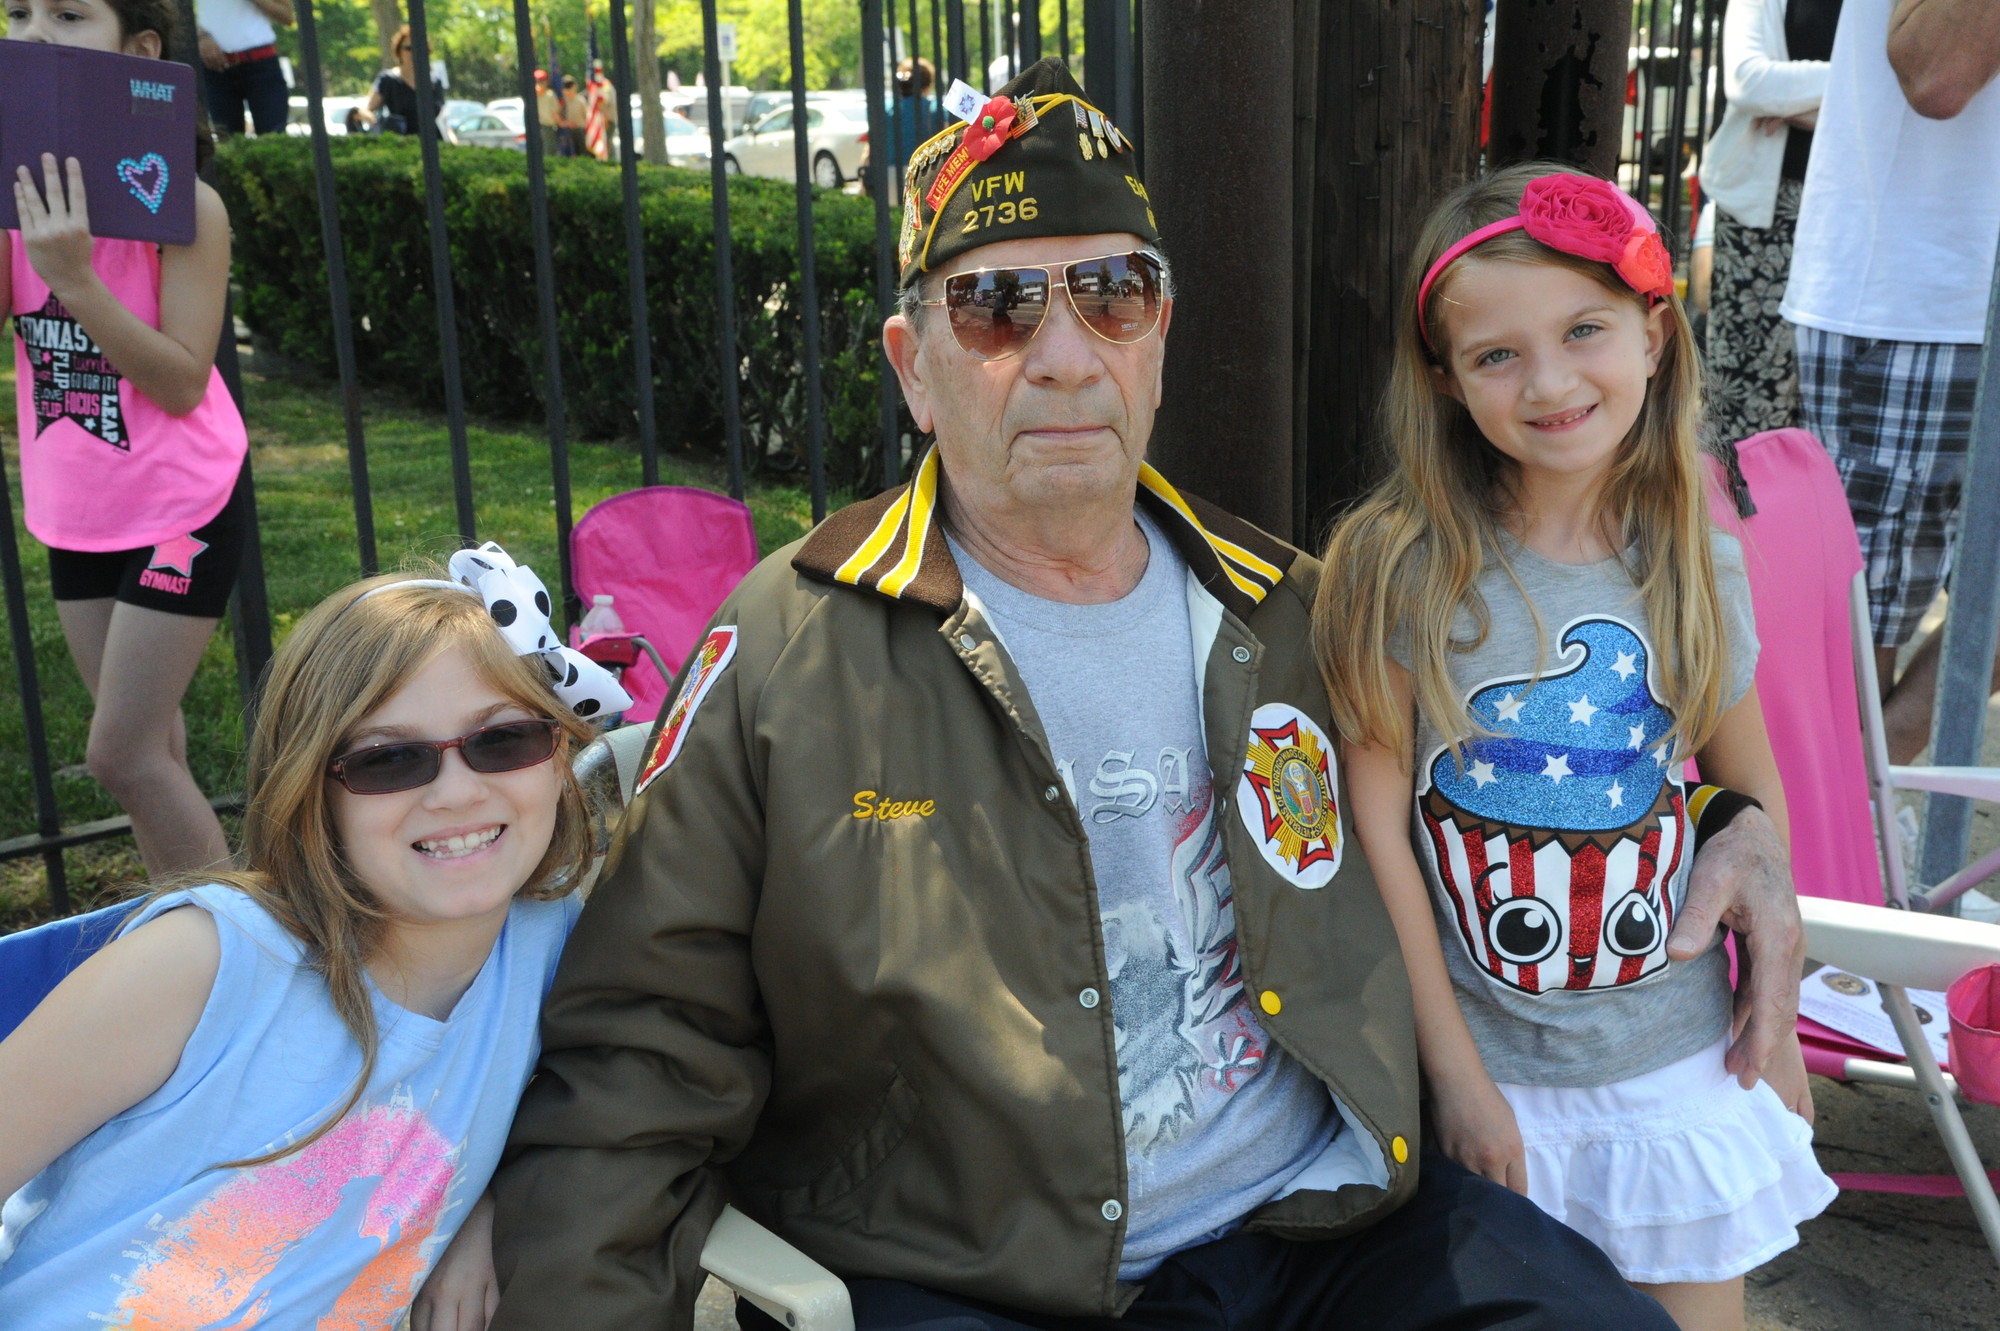 Steve Grismondi, a Private First Class of the U.S. Army in the Korean War, with his granddaughters, Brianna, 8, and Kayla, 6.